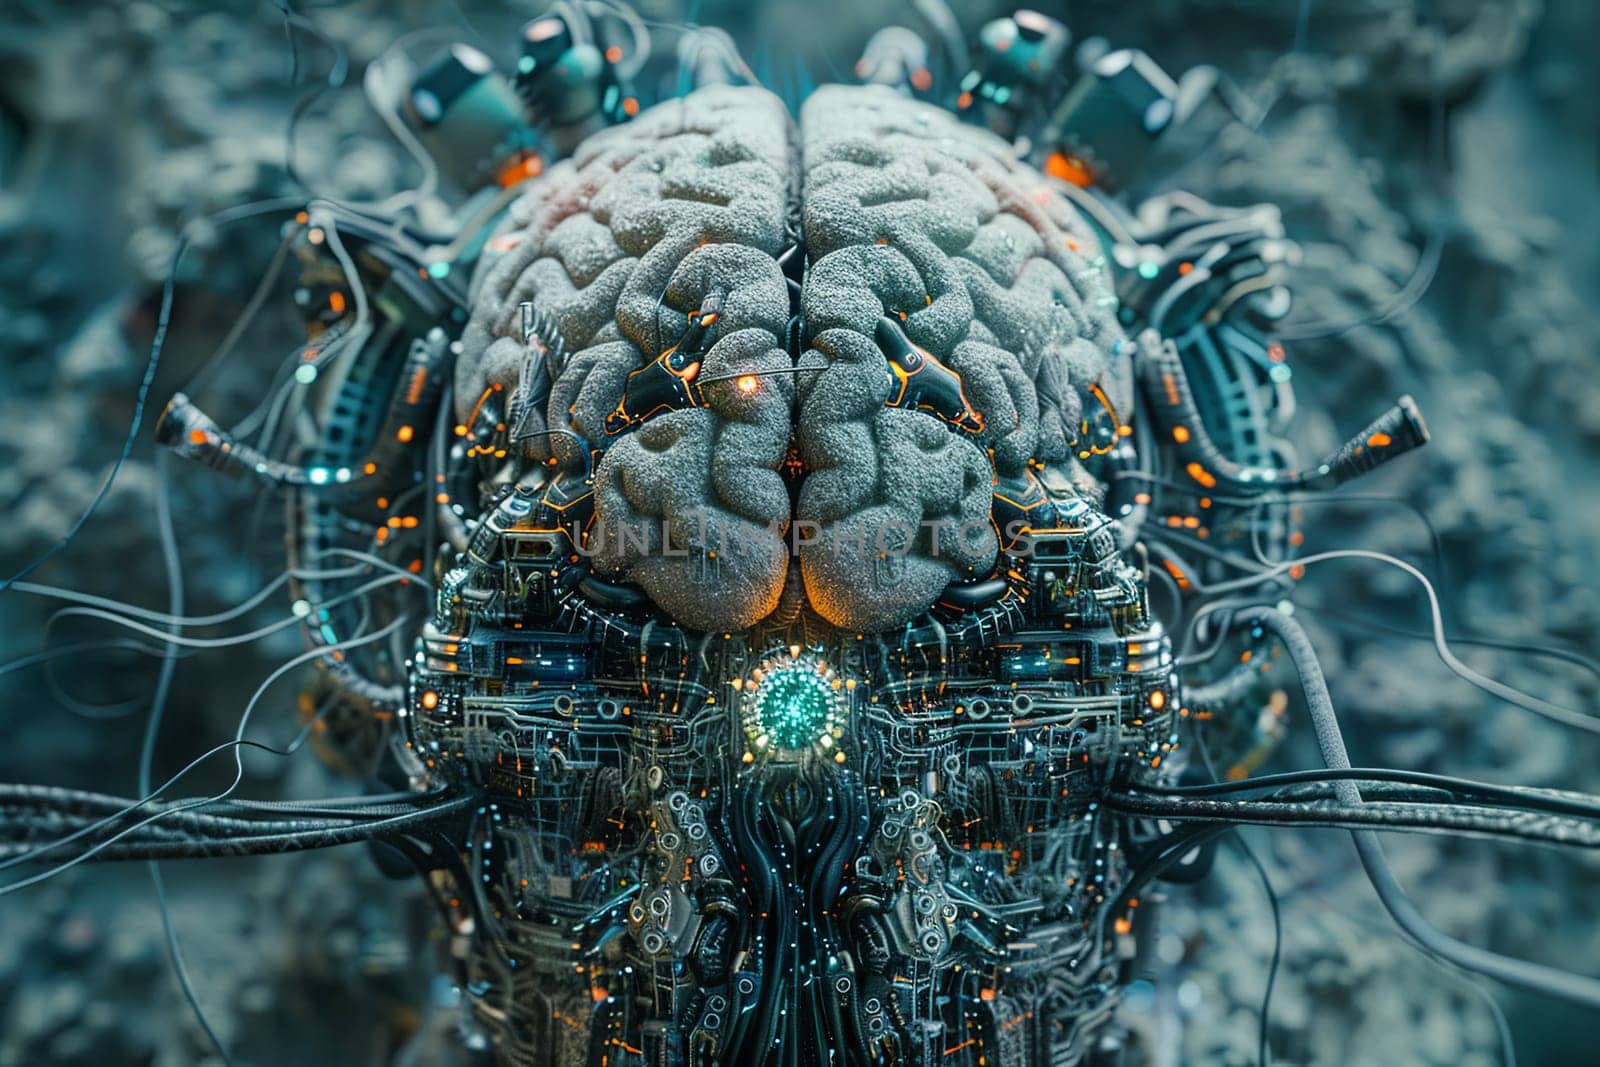 A close-up image of a futuristic, digitalized human brain, symbolizing the merging of human intelligence with artificial intelligence.